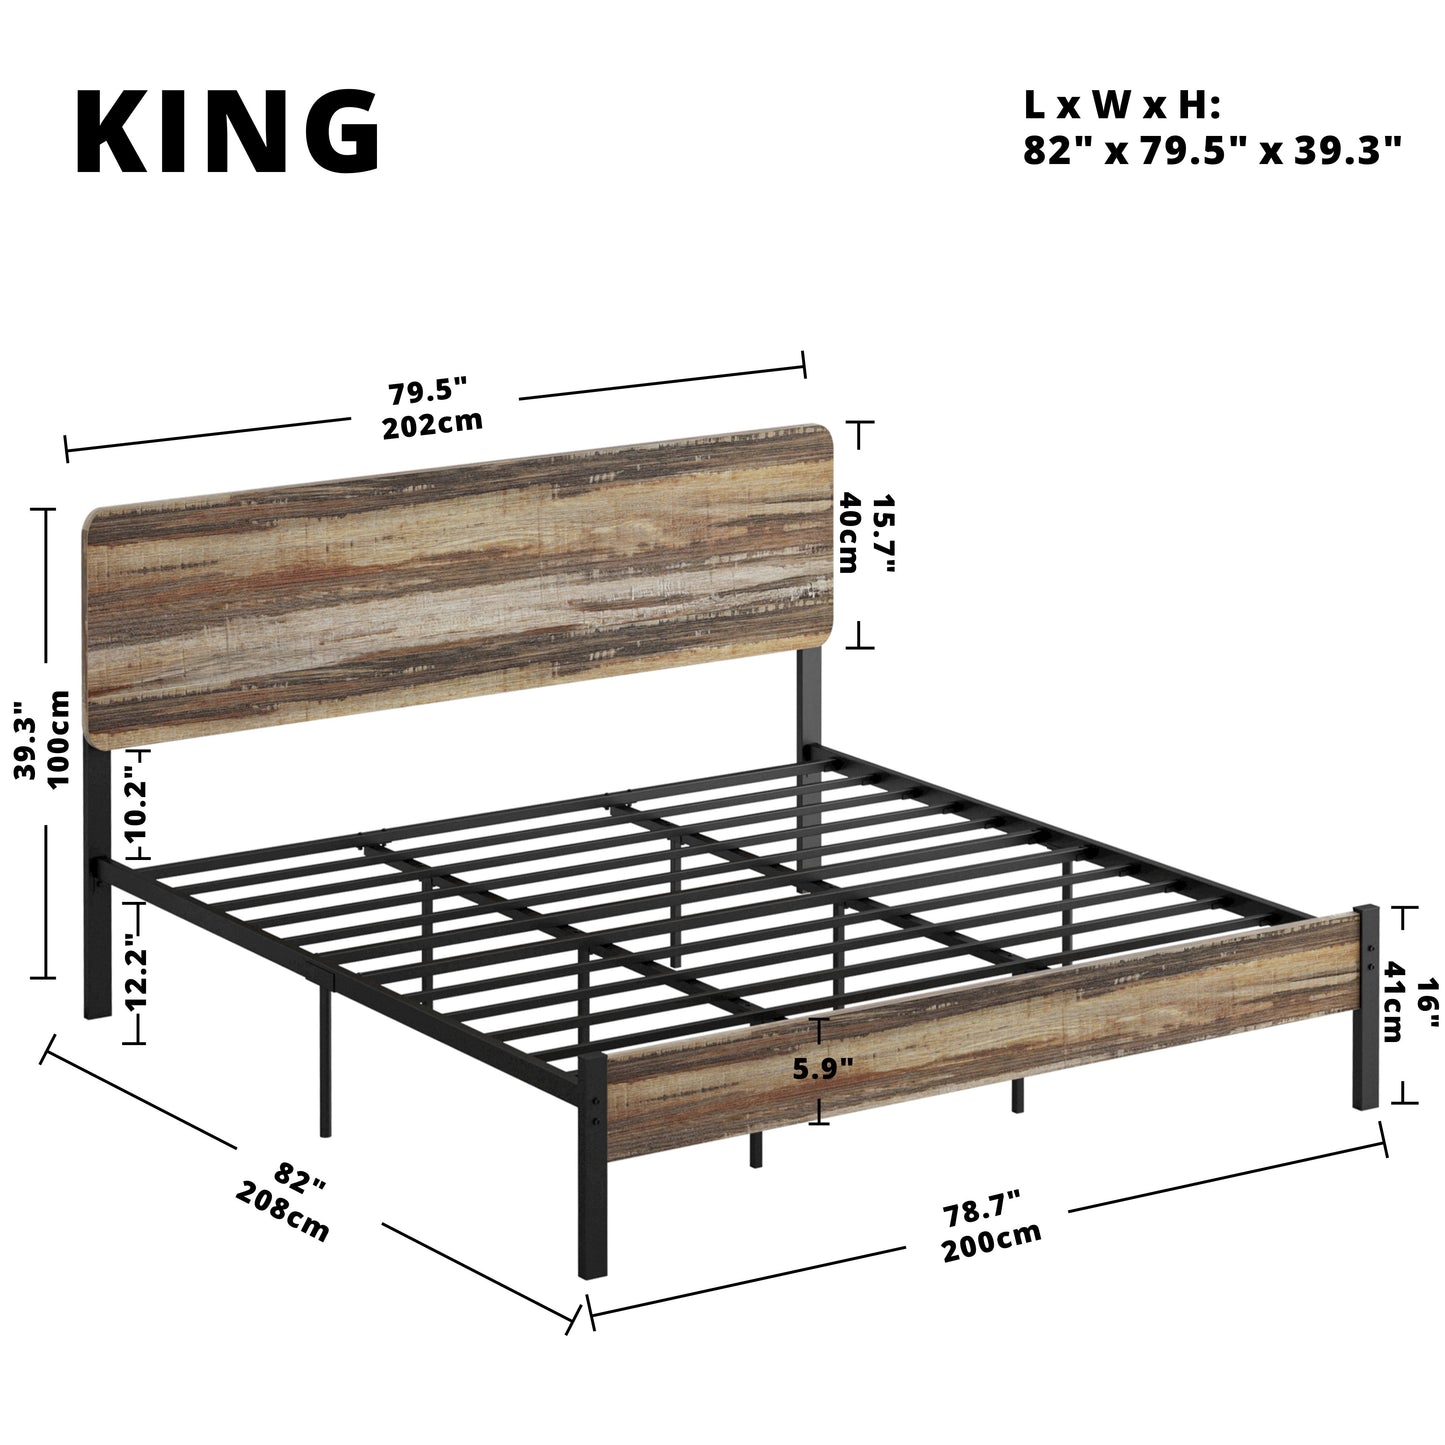 LIKIMIO Bed Frame with Headboard Rustic Brown